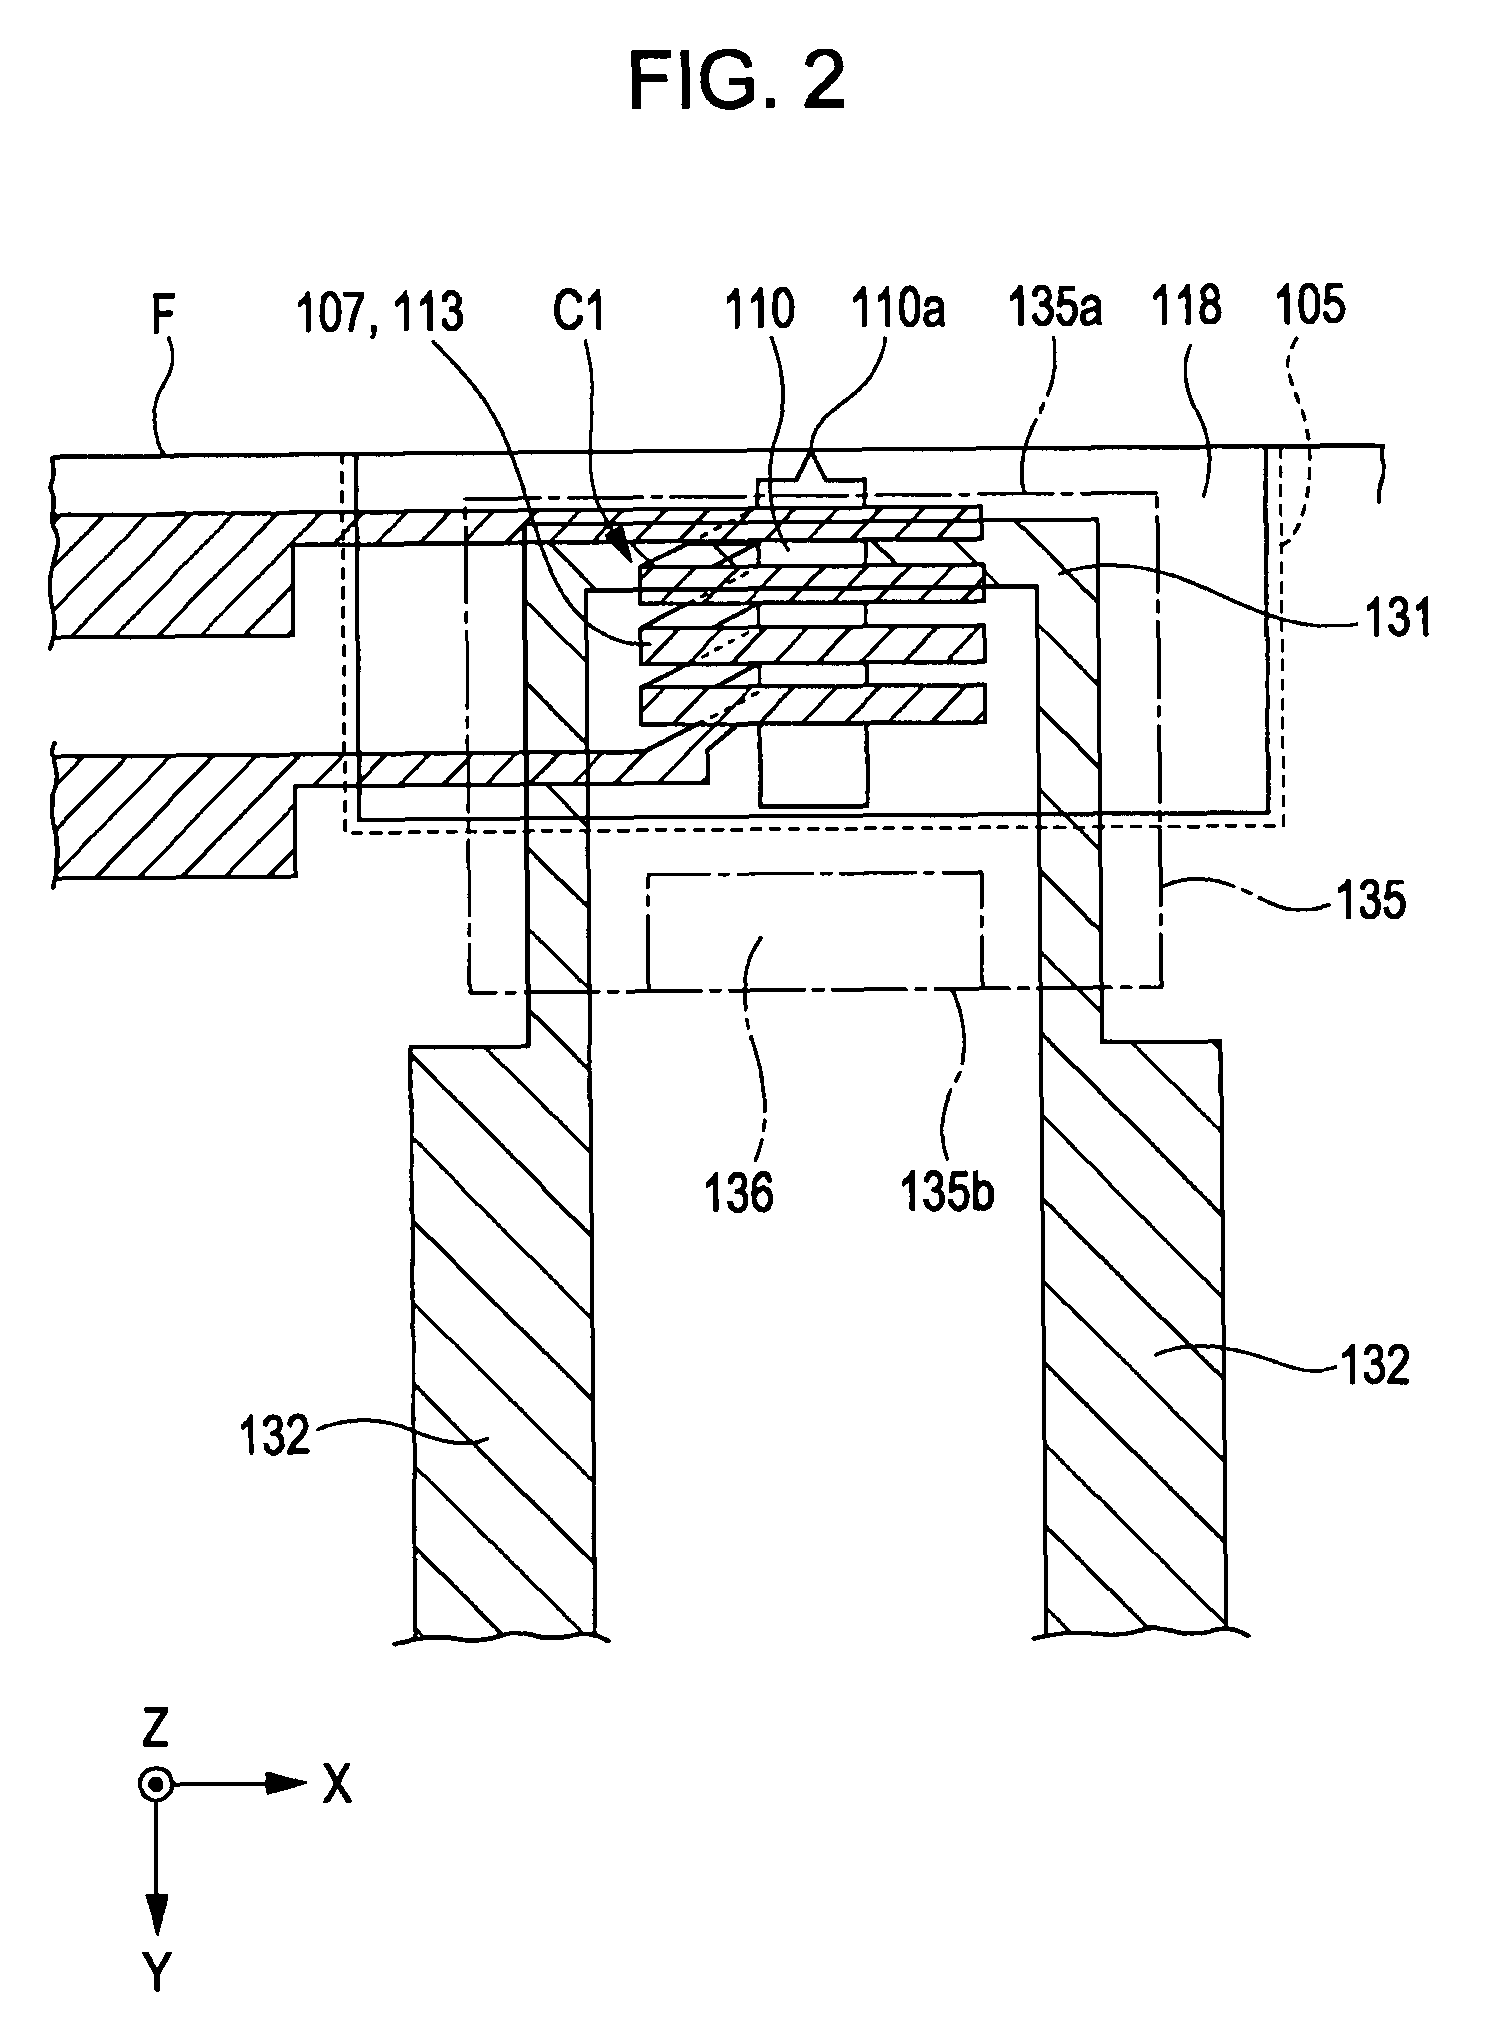 Perpendicular magnetic recording head including heating element